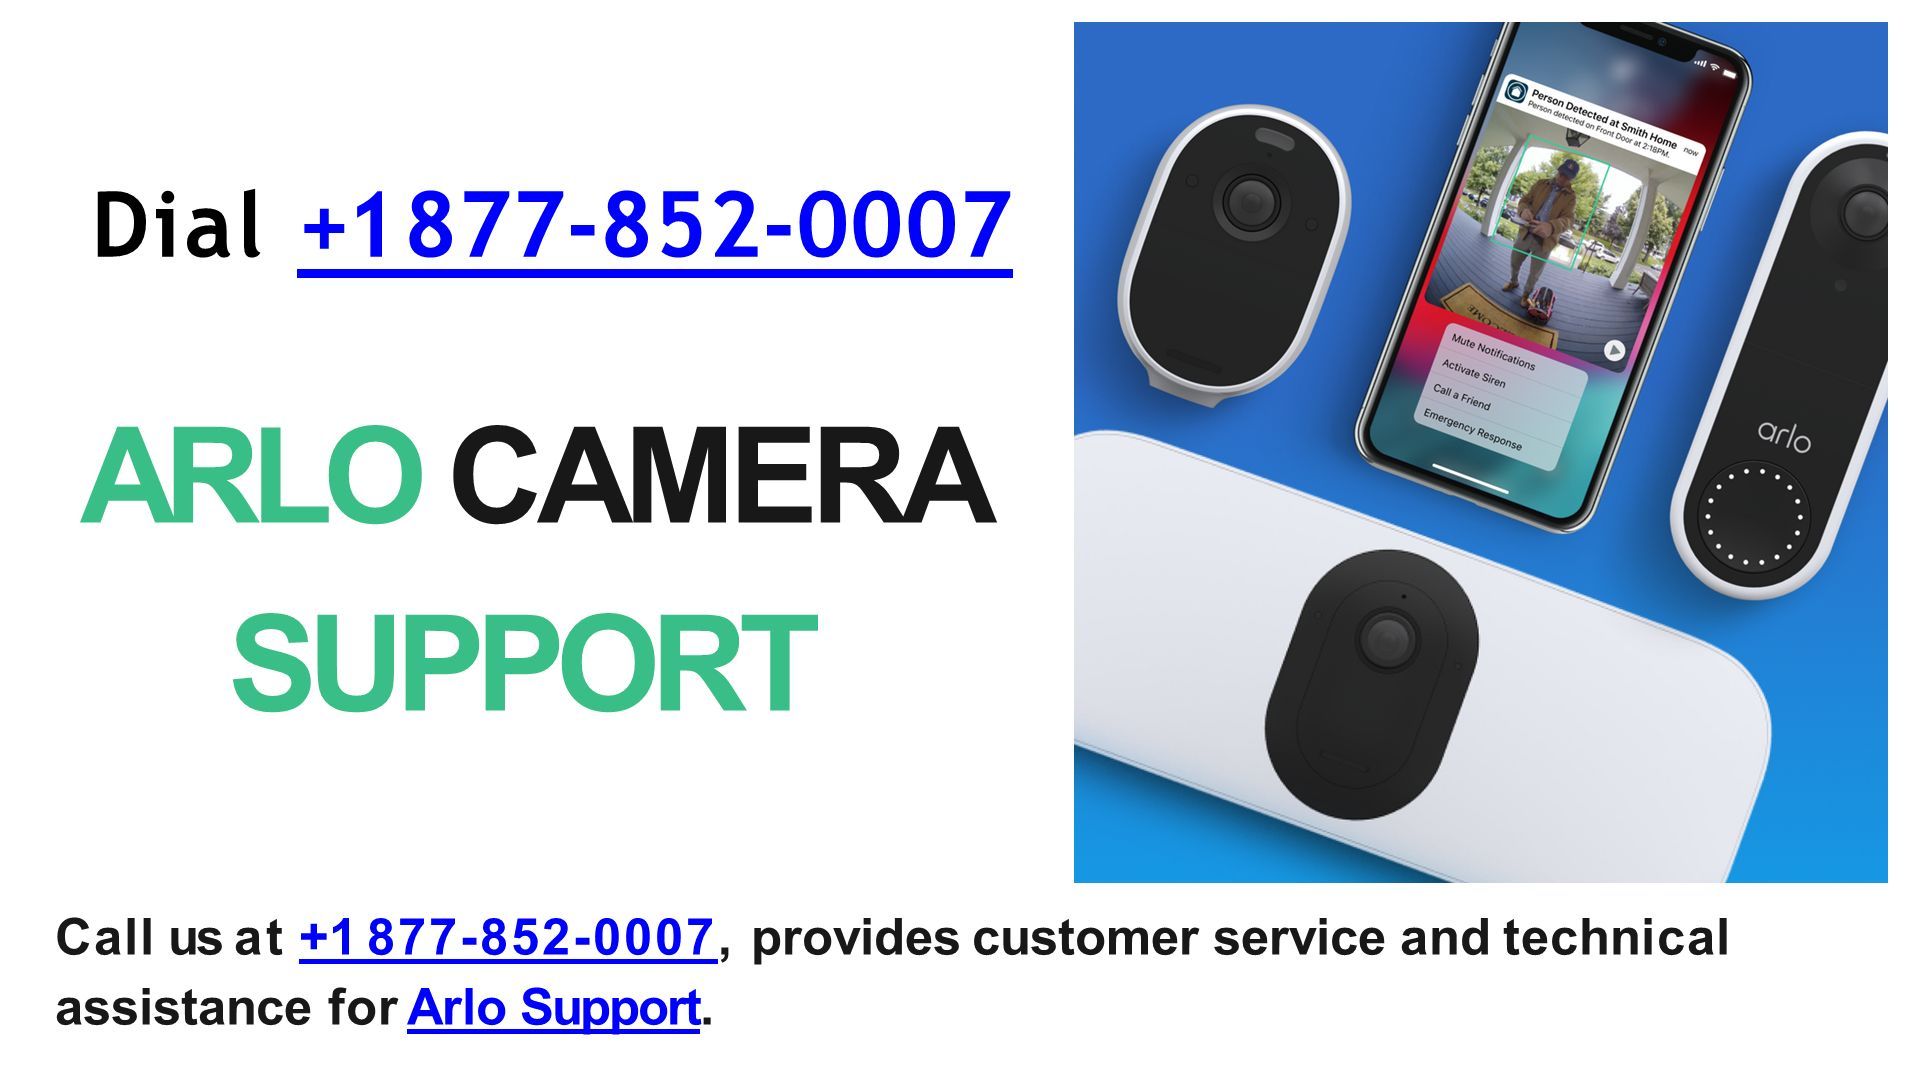 ARLO CAMERA SUPPORT Call us at , provides customer service and technical  assistance for Arlo Support Arlo Support Dial ppt download